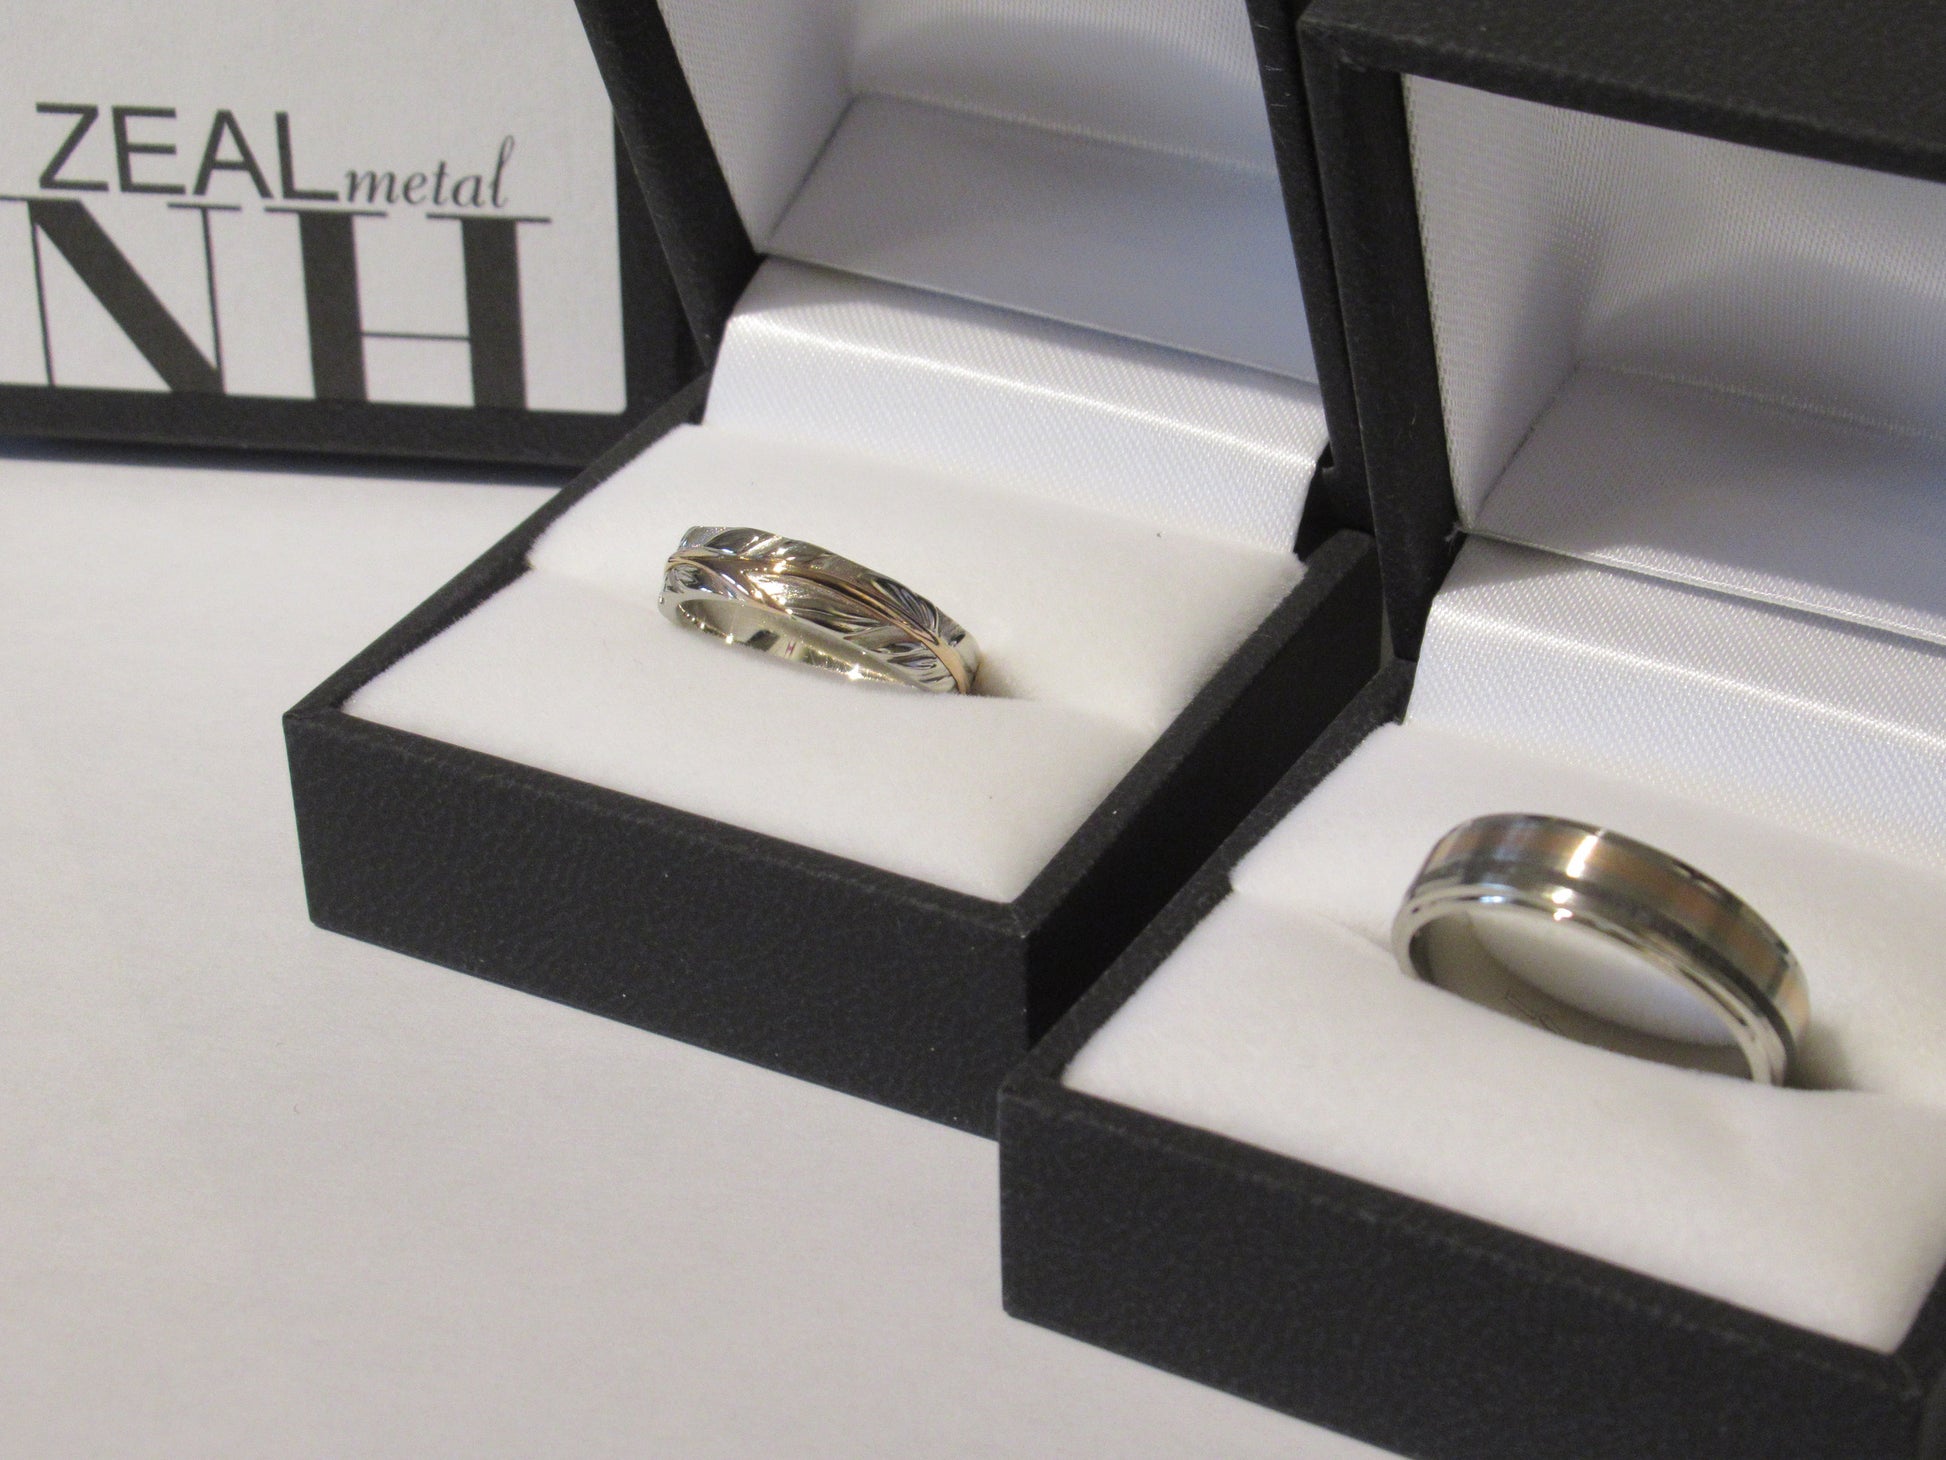 Handmade wedding and engagement ring by ZEALmetal in Kingston, ON Canada